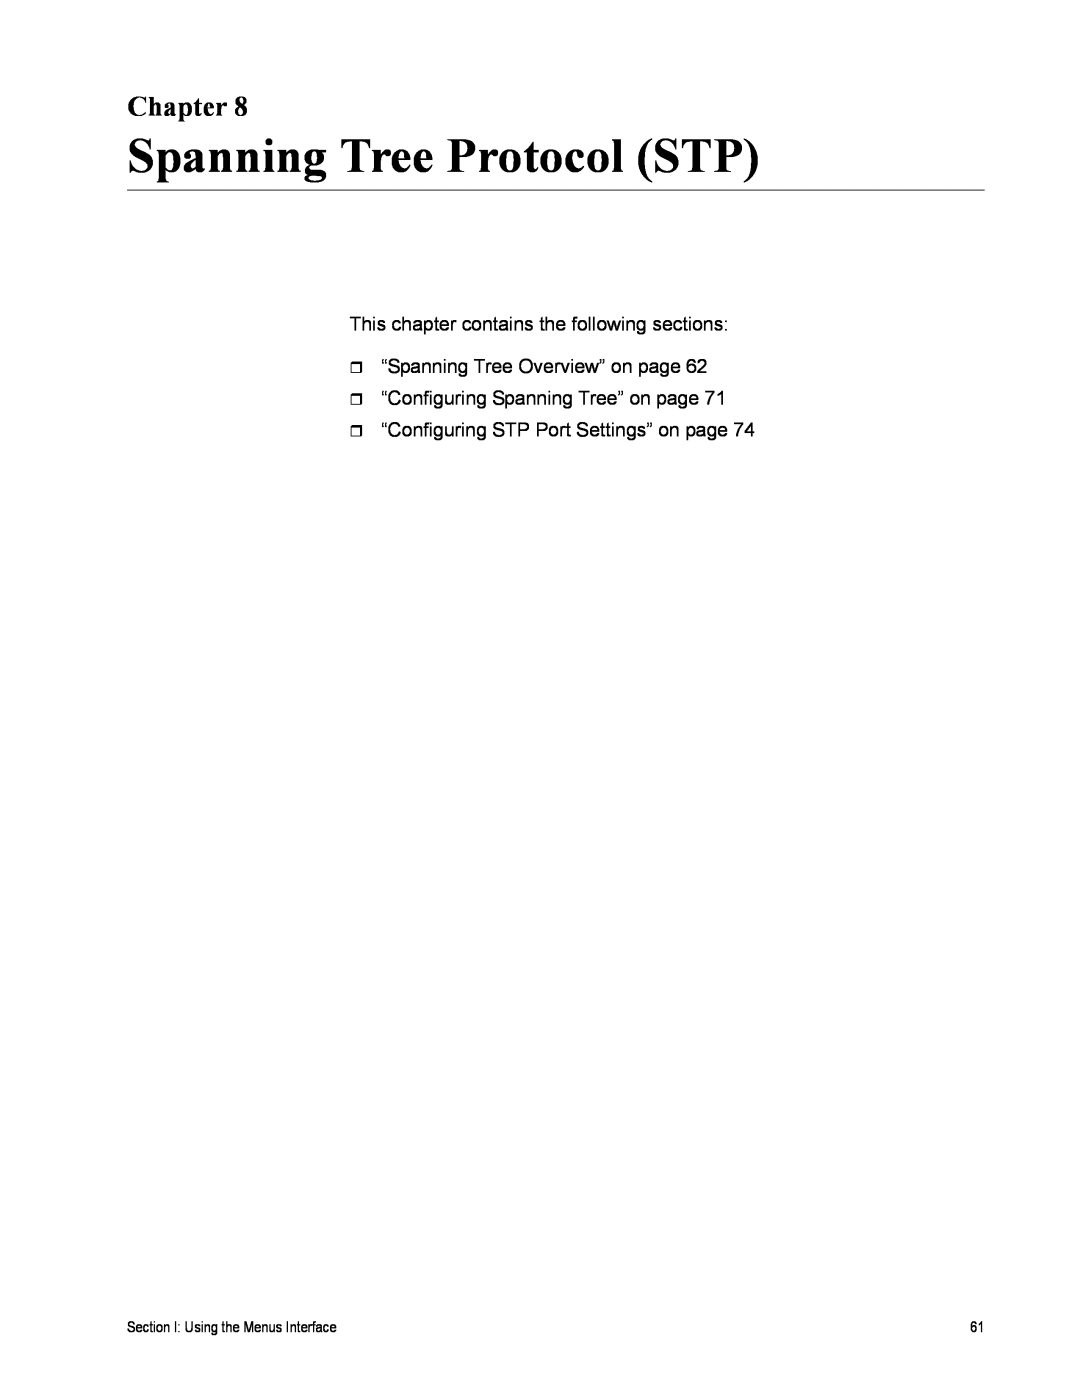 Allied Telesis AT-GS950/8 manual Spanning Tree Protocol STP, Chapter 